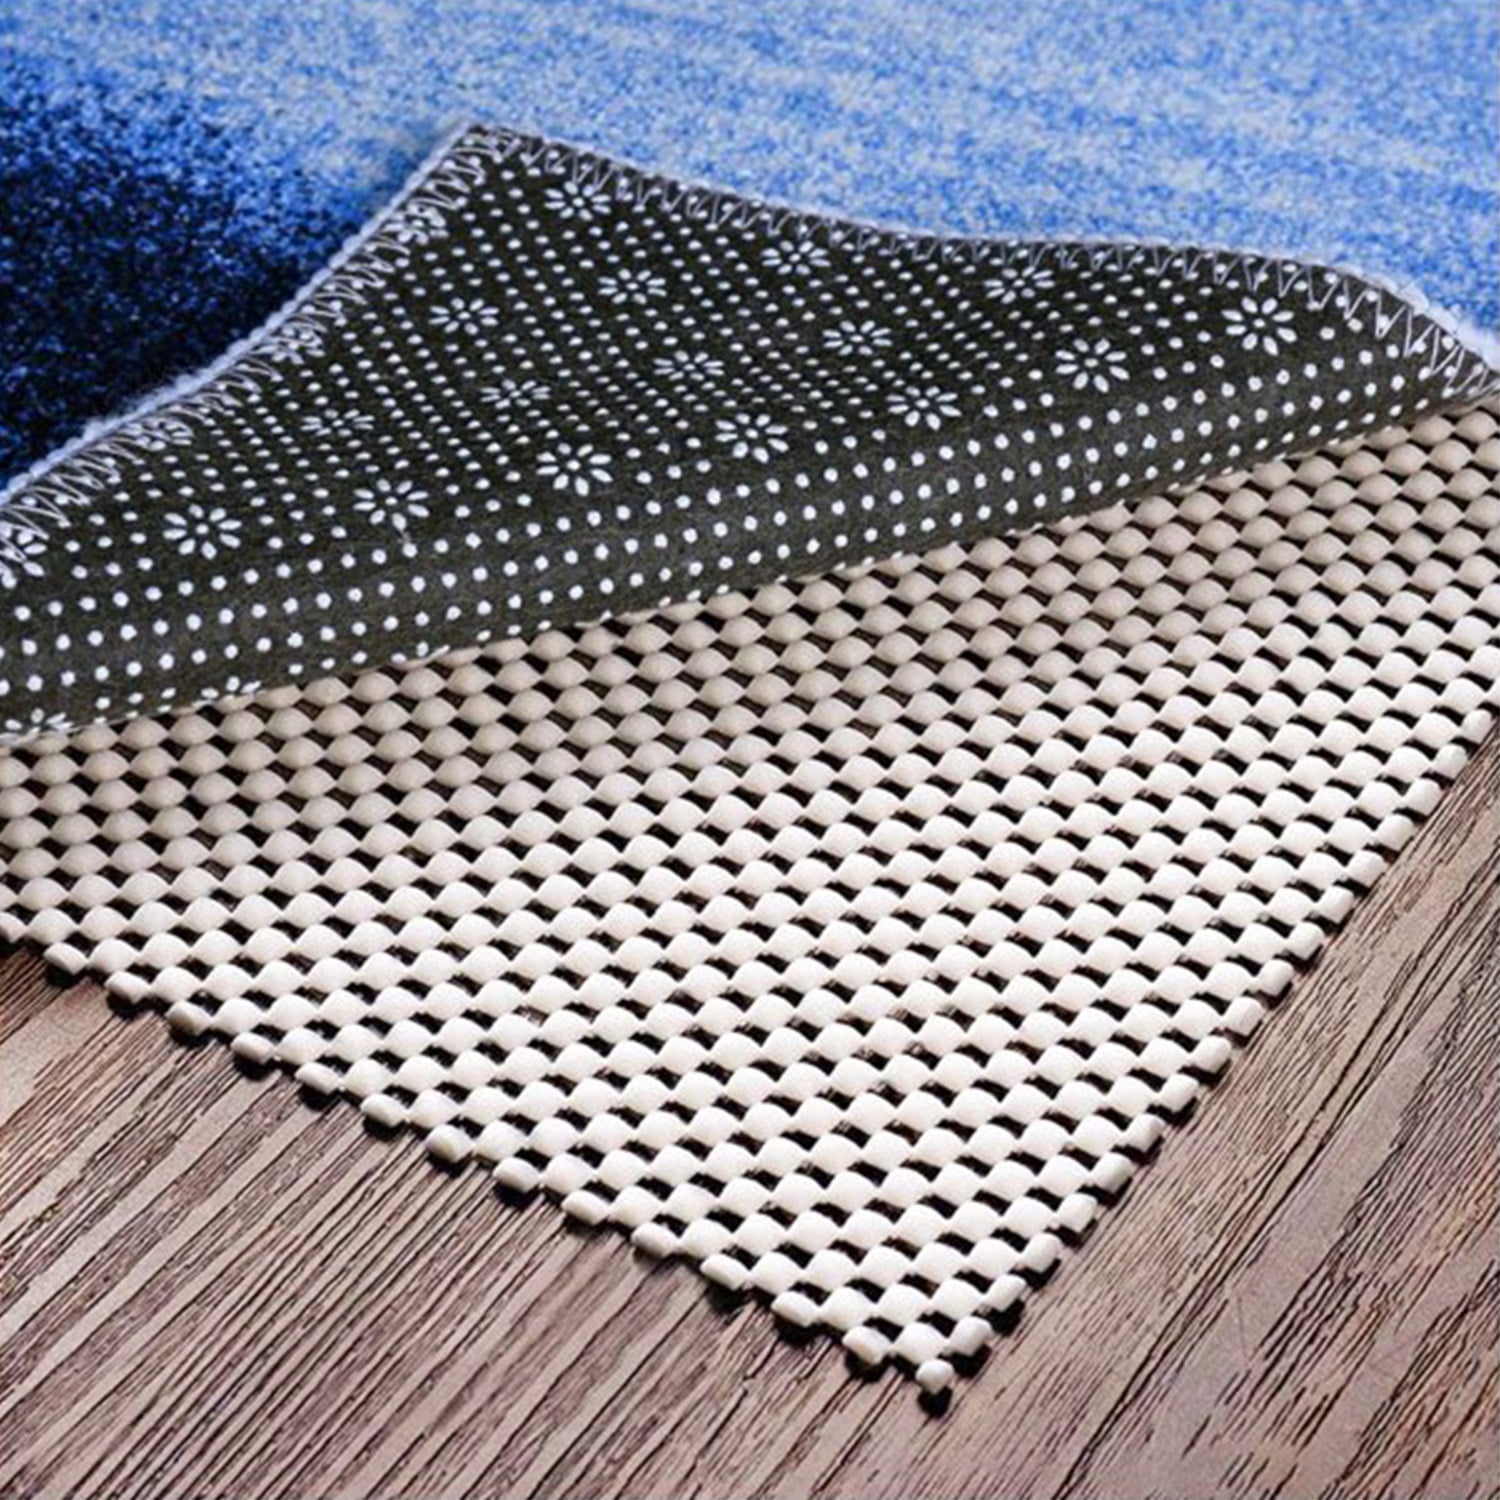 Non Slip Area Rug Pad Gripper - 9 x 12 Extra Strong Grip Carpet Mat Anti  Skid Rug Padding Provides Protection and Cushion for Area Rugs Tile Hardwood  Surface Floors Keep Your